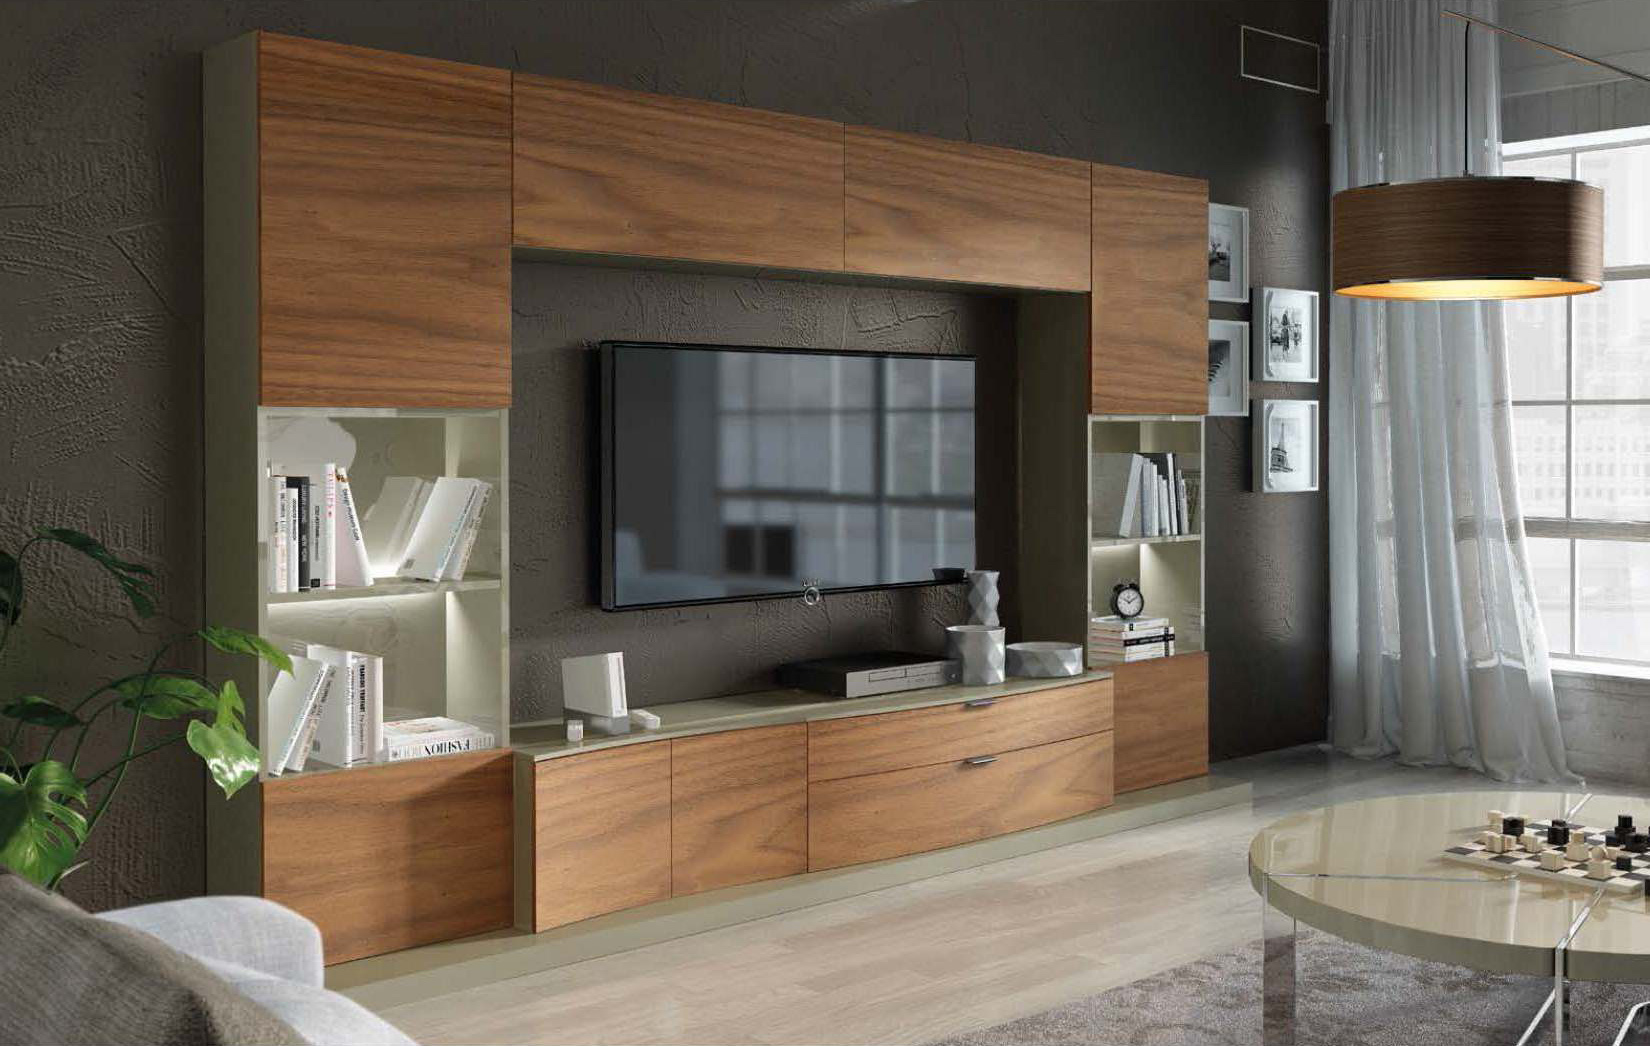 https://www.primeclassicdesign.com/images/wall-display-units-cabinets/modern-living-room-wall-unit-with-entertainment-center.jpg